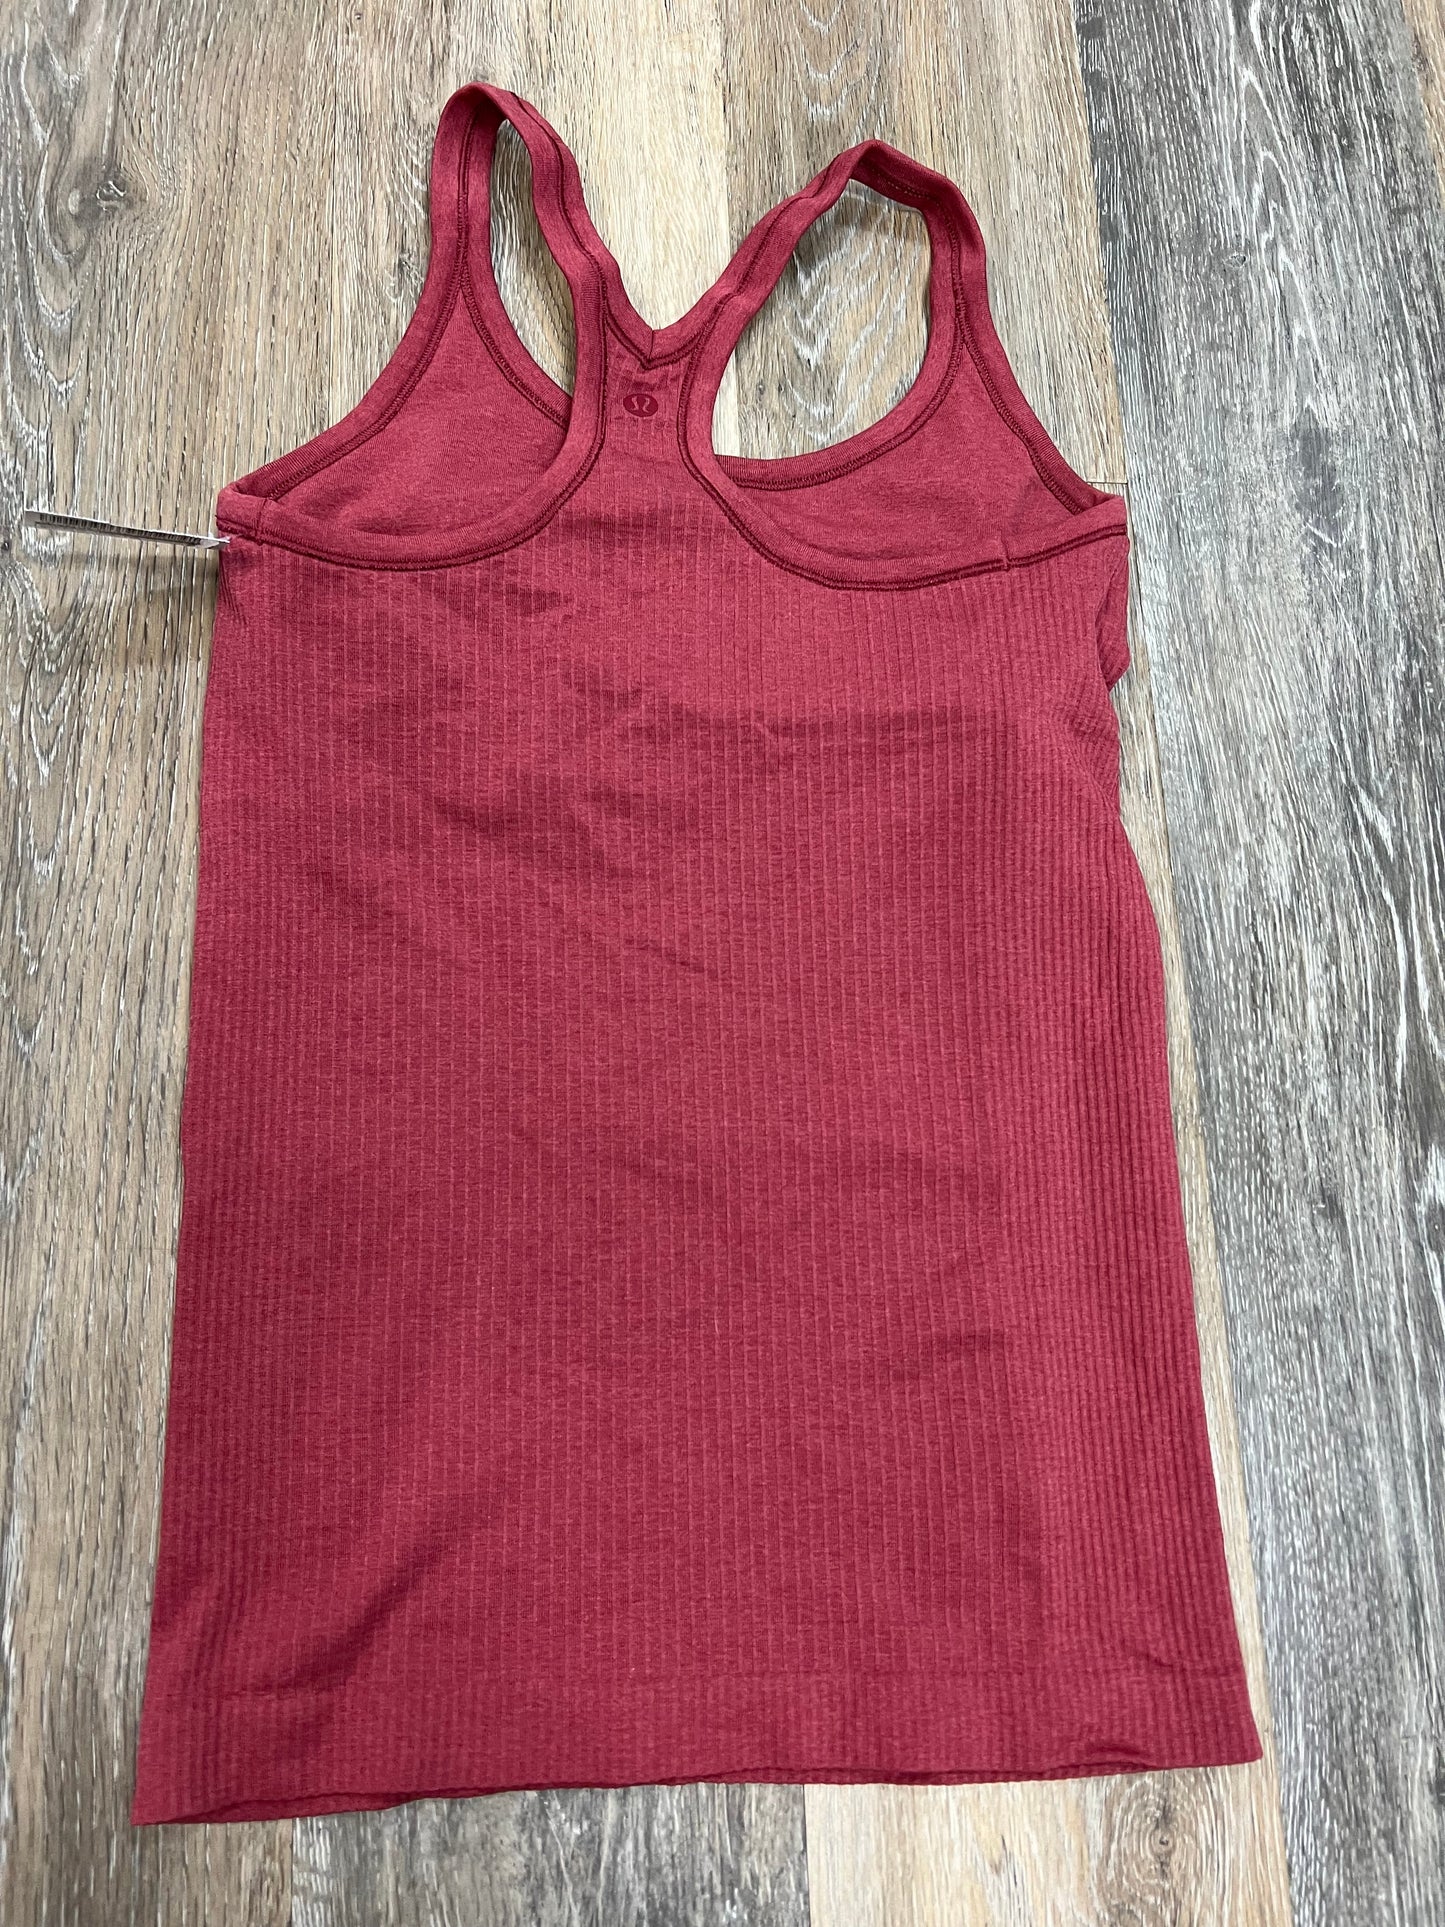 Red Athletic Tank Top Lululemon, Size 6